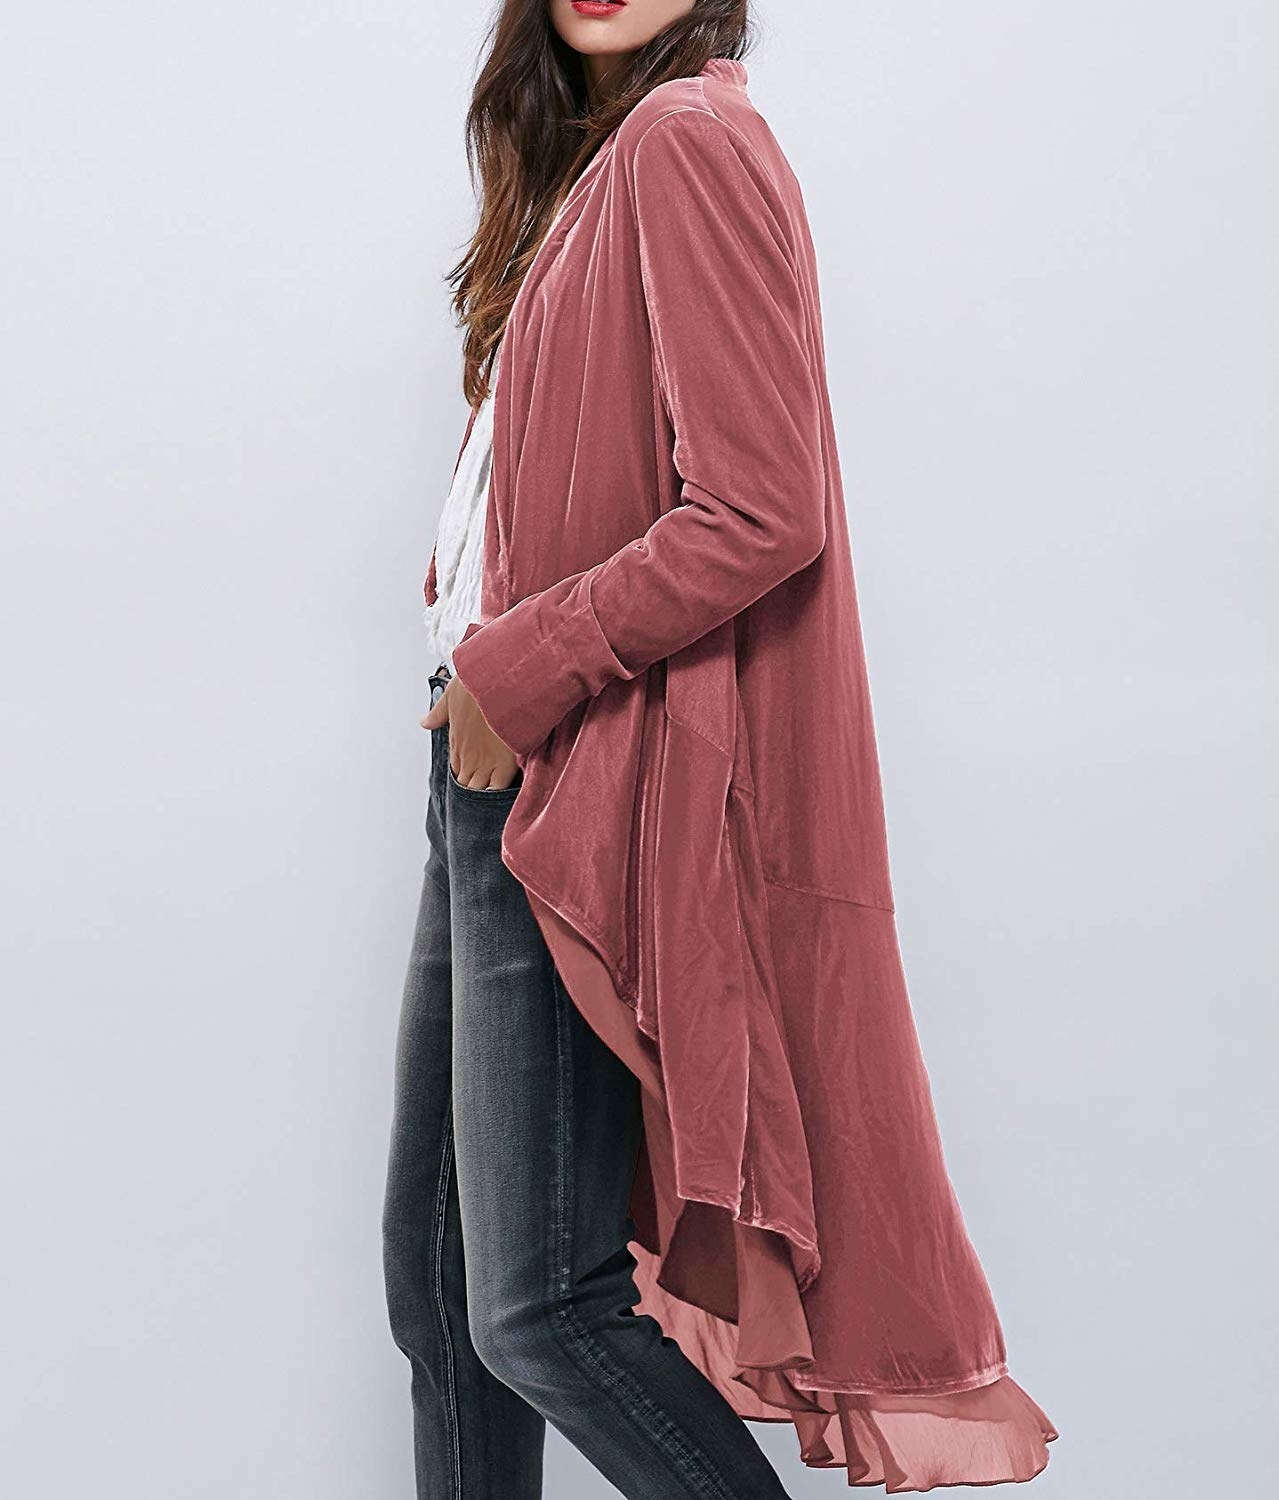 A model in the rose duster